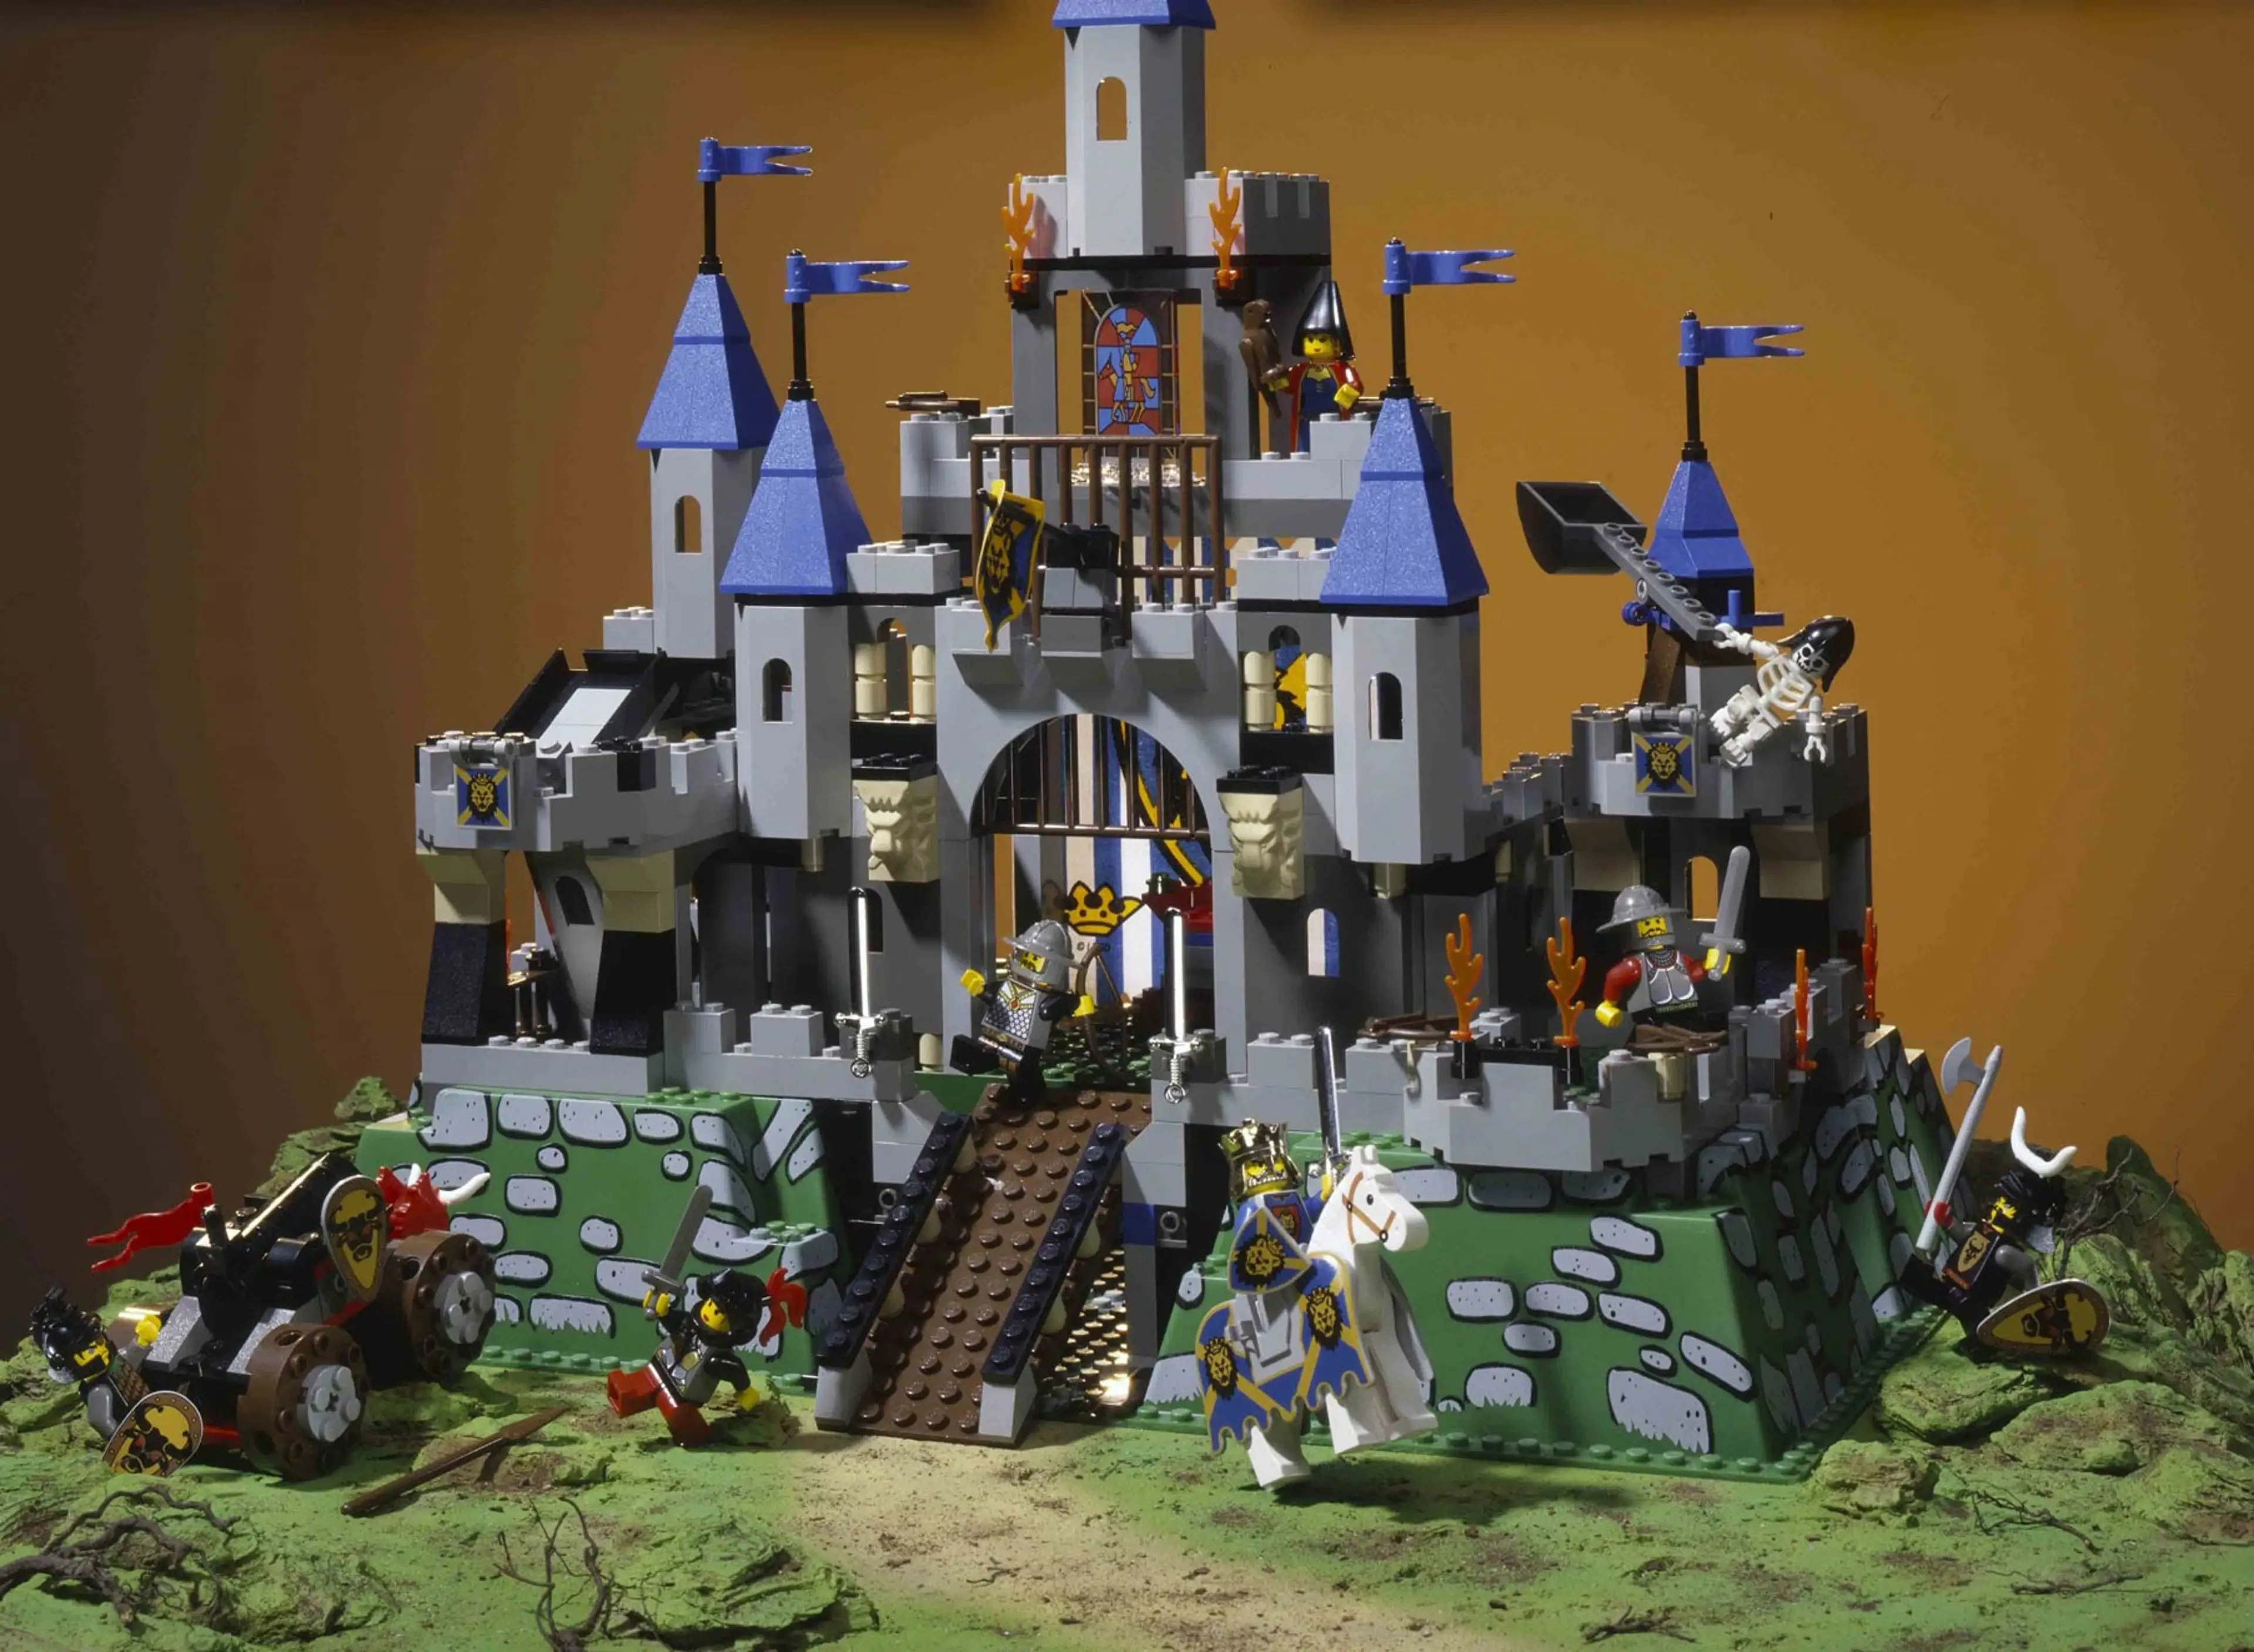 Grey LEGO castle set from 2000